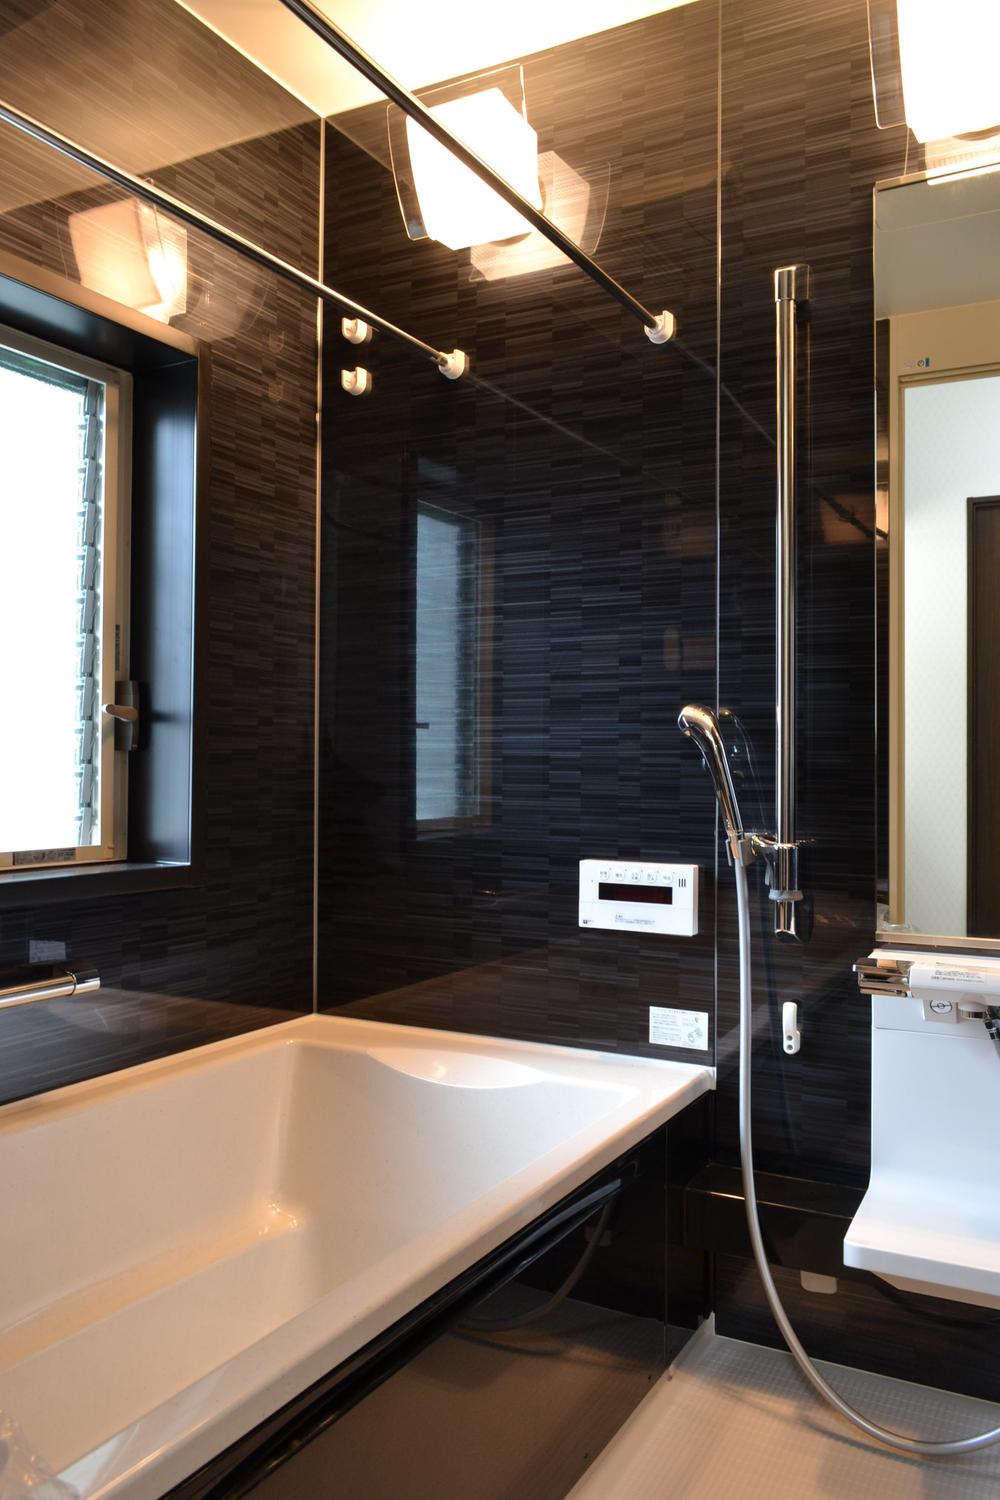 Bathroom. If you heal the fatigue of the day, After all, bath time! It drifts profound feeling, Bathroom tones and black, Likely to indulge in elegant mood. In also equipped with bathroom heater, Nashi rainy season and winter of your laundry is also a problem (No. 5 locations)